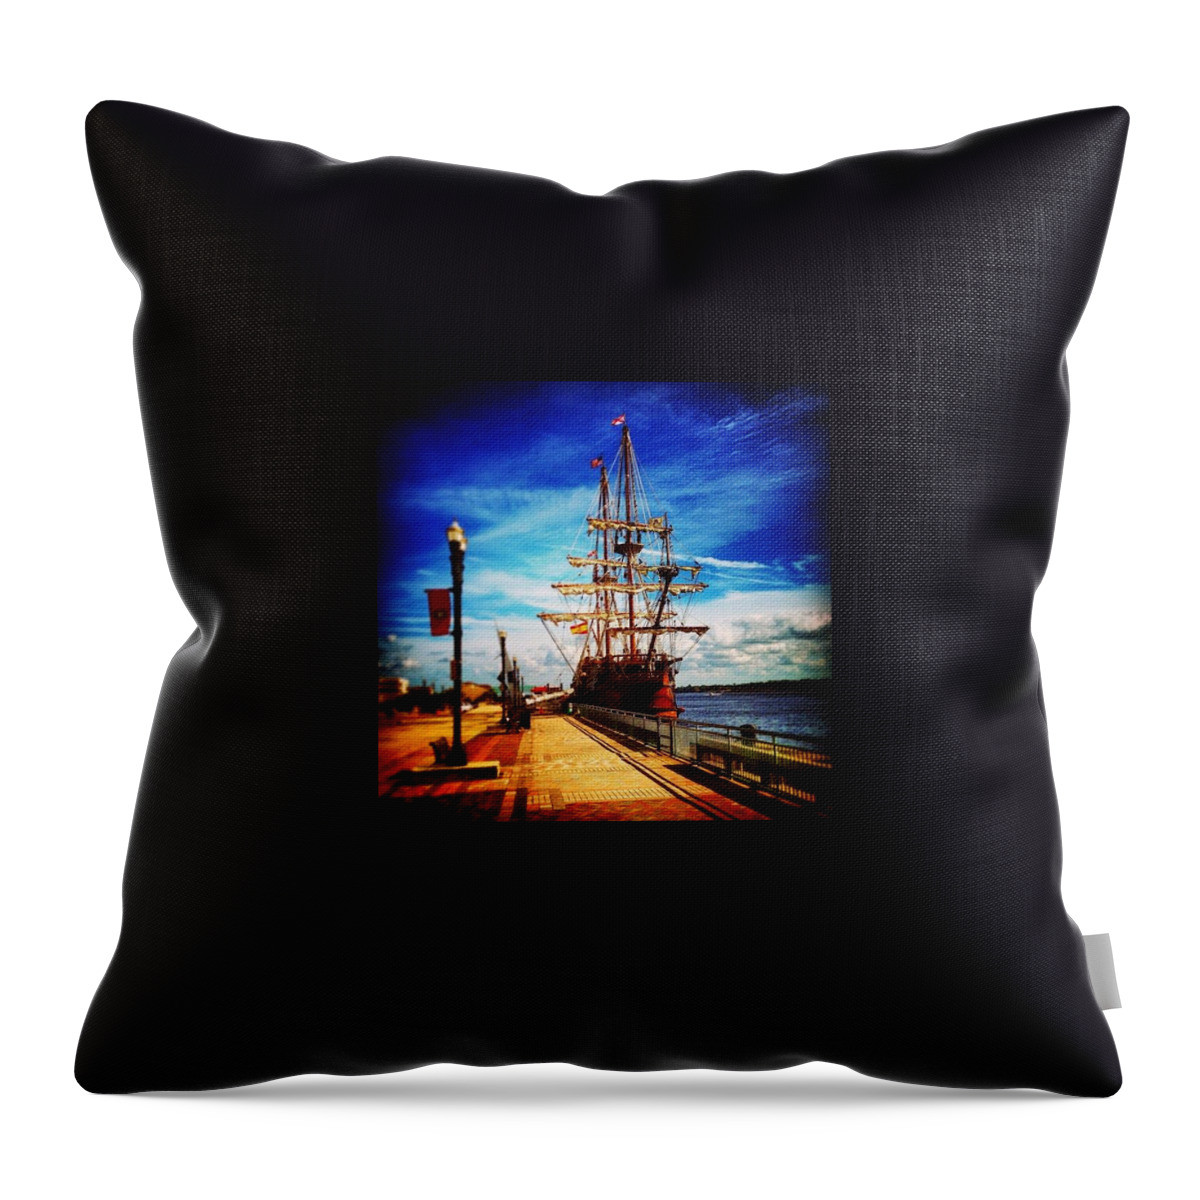 Spanishpirates Throw Pillow featuring the photograph Pirate Ship by Brandon McKenzie